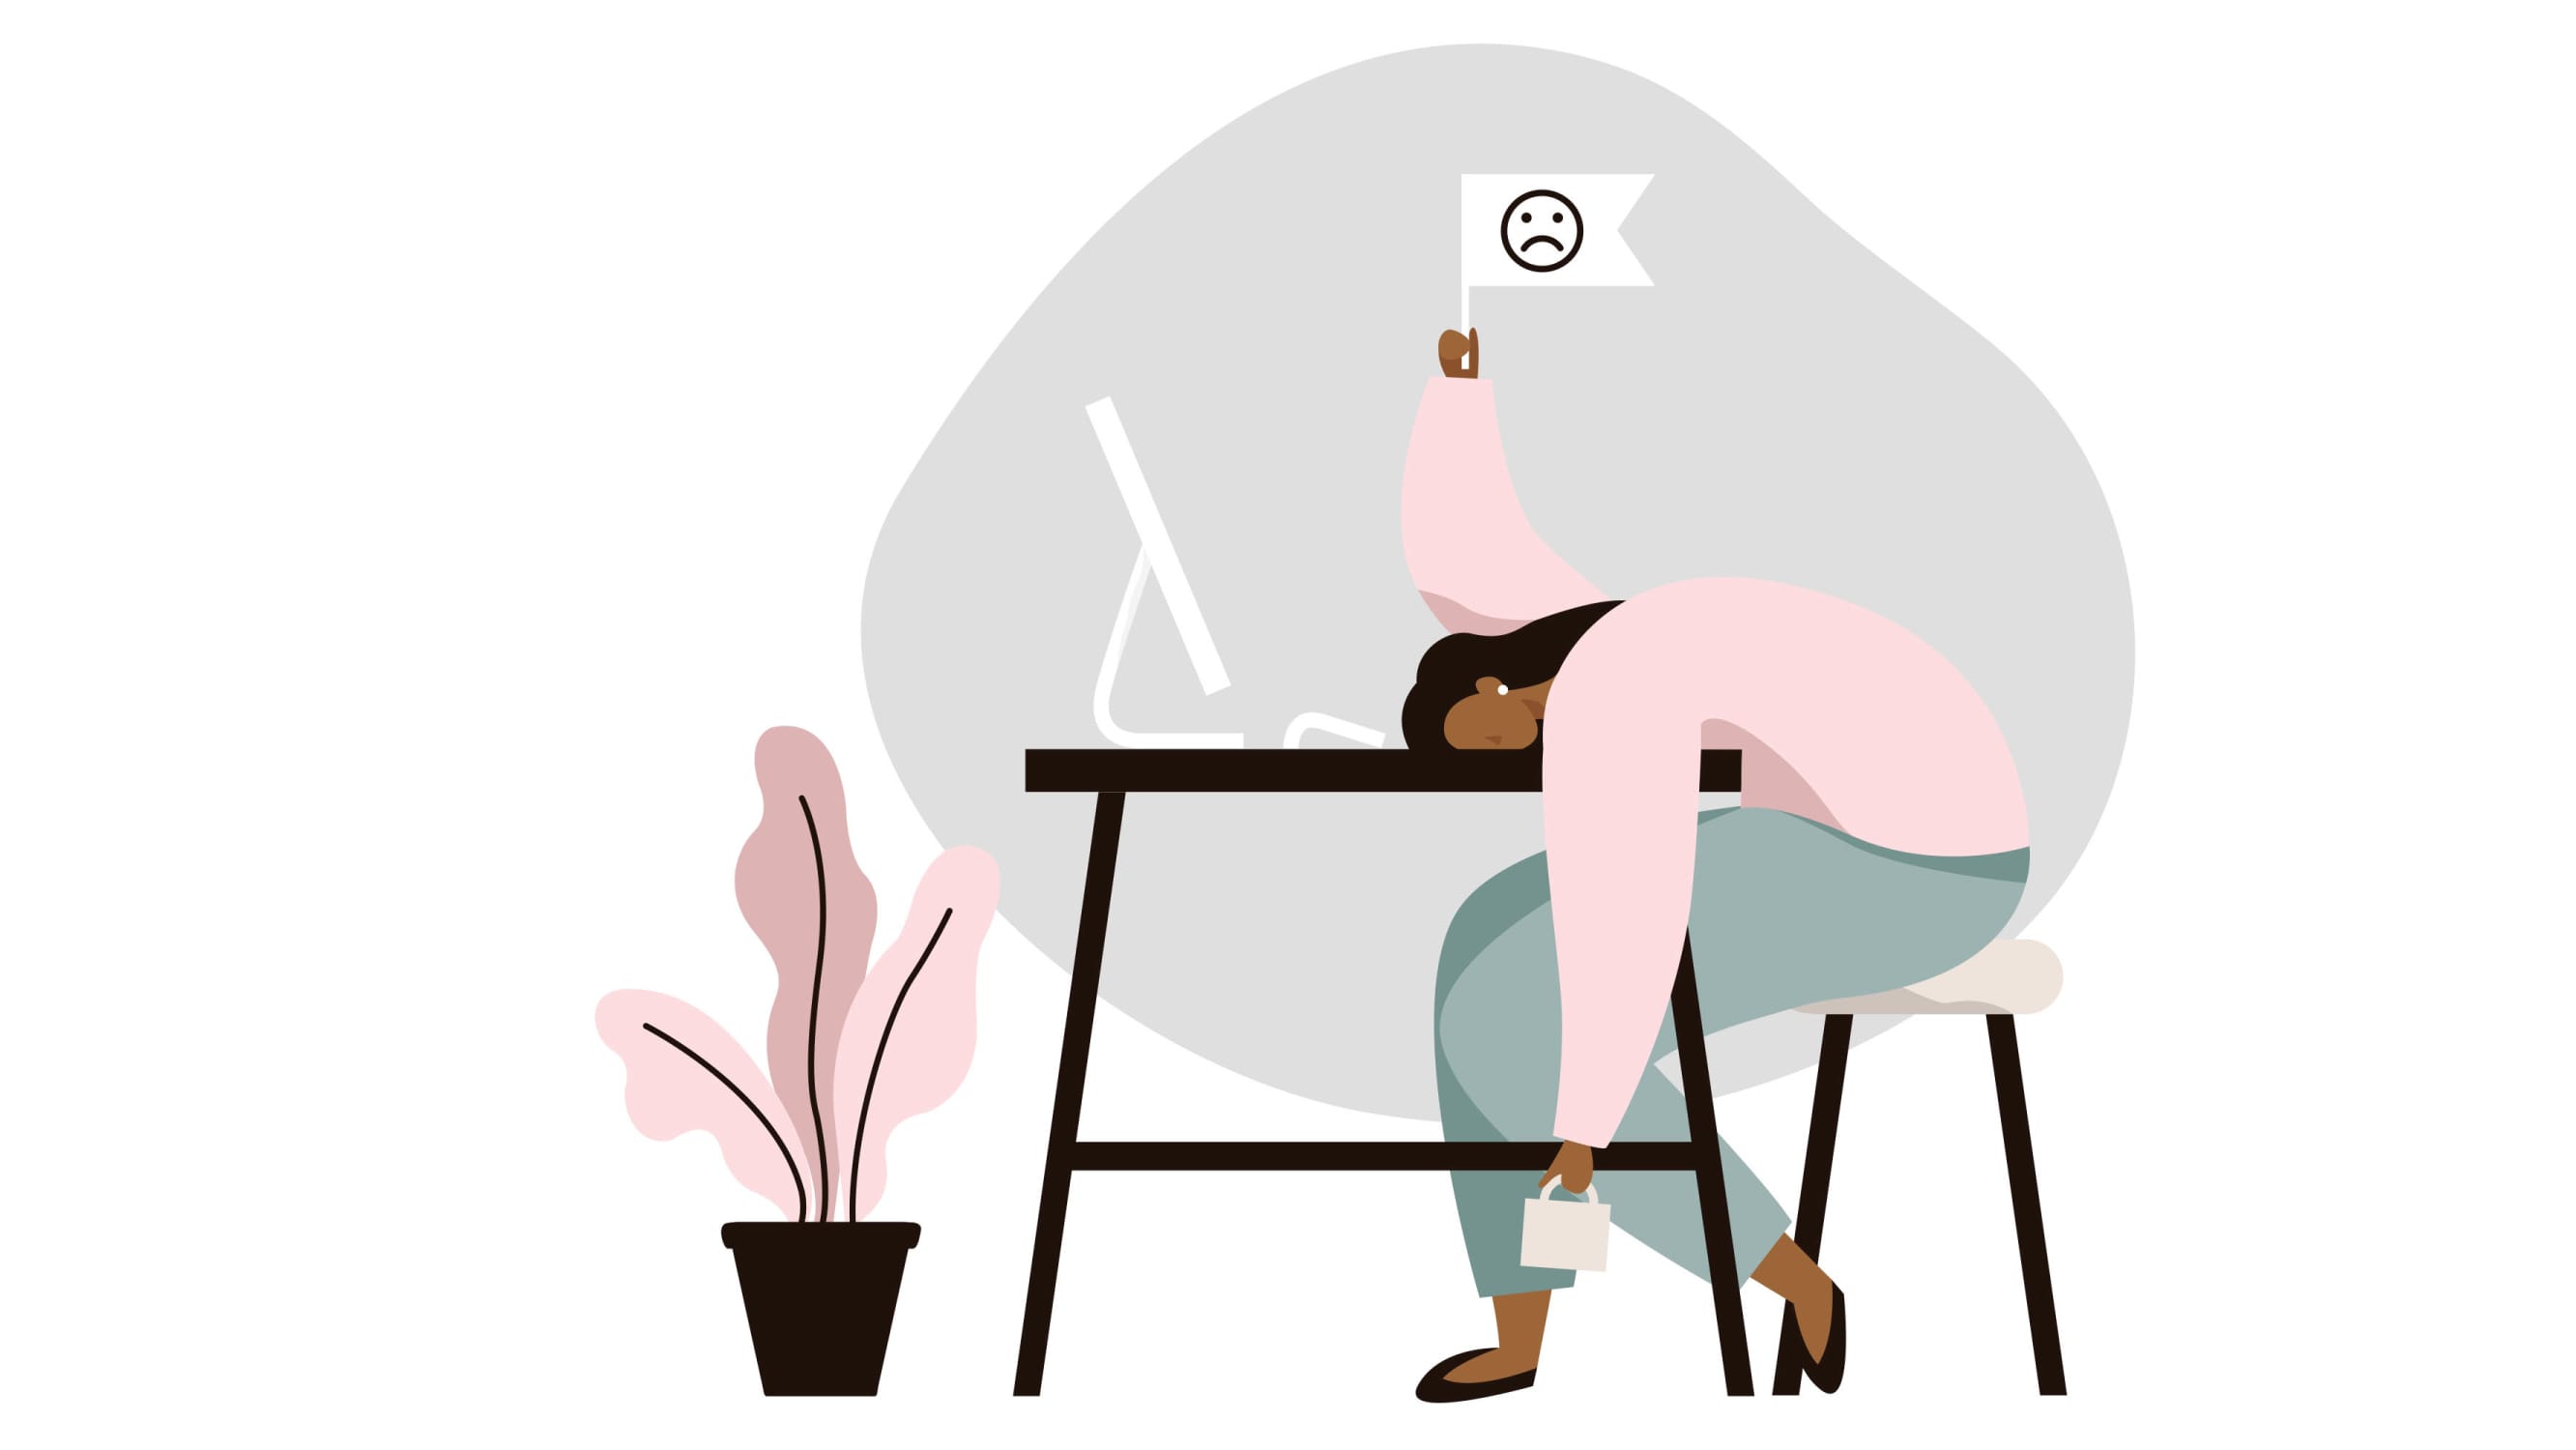 Illustration of woman, possibly depressed, anxious, or stressed at a desk slumped over raising a white flag with an unhappy face on it.